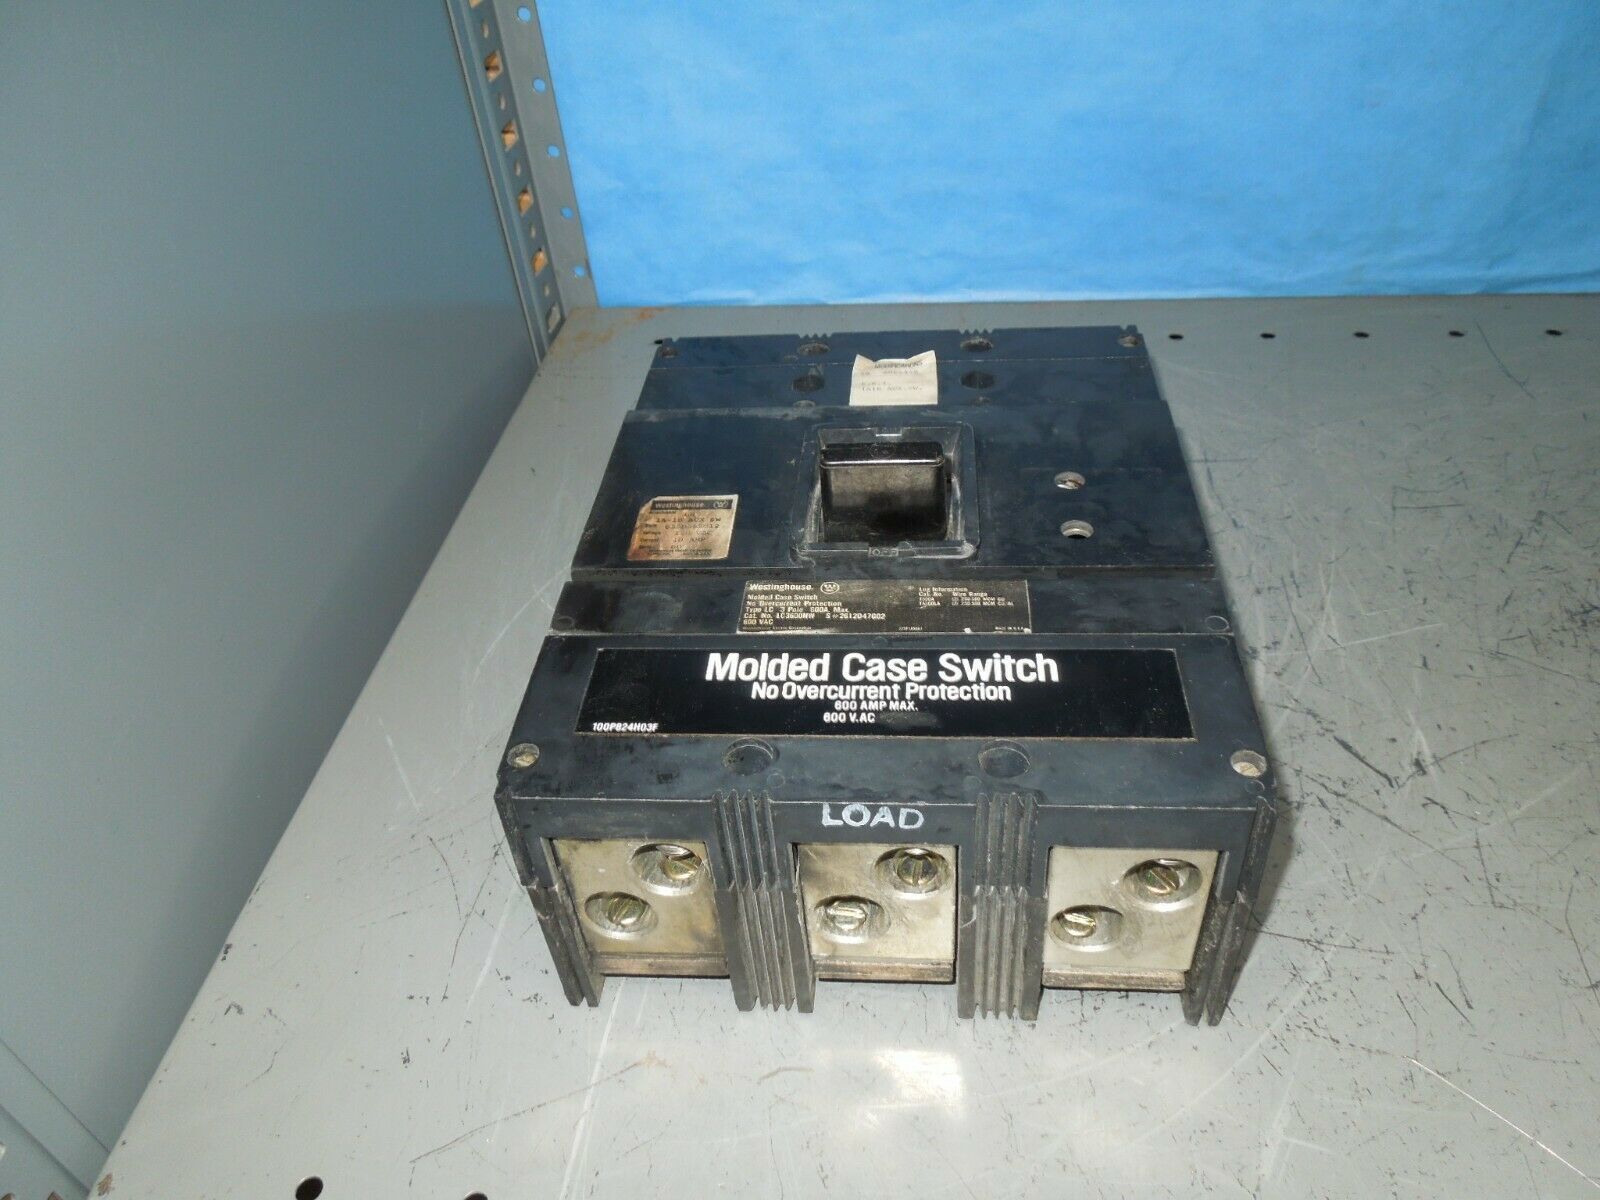 Westinghouse LC3600NW 600A 3P 600V Molded Case Switch Style# 2612D47G02 Used - $700.00